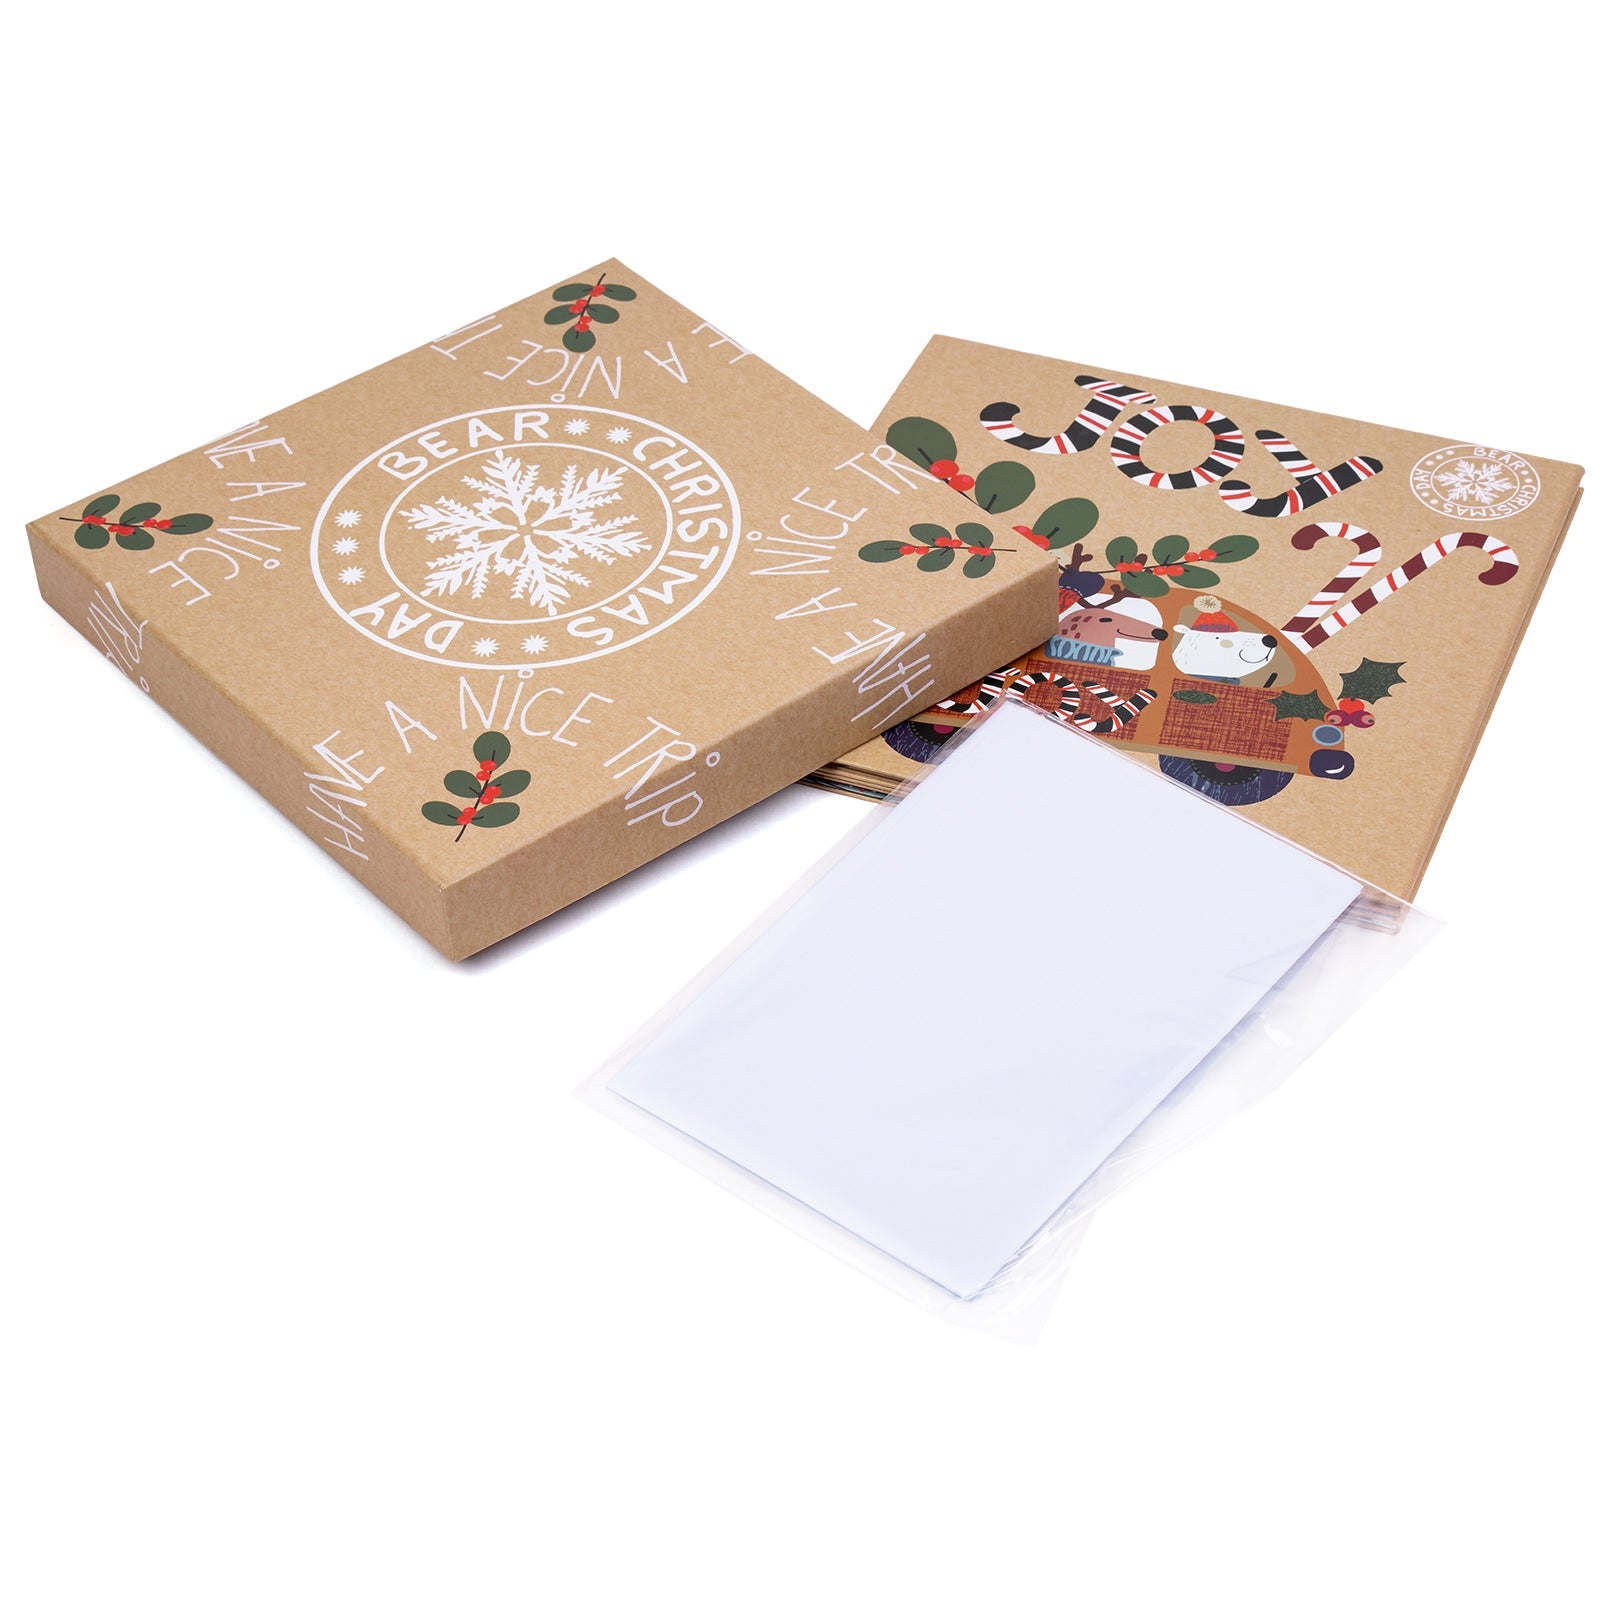 9 inch Square Christmas Gift Box with Lid - Polar Bear